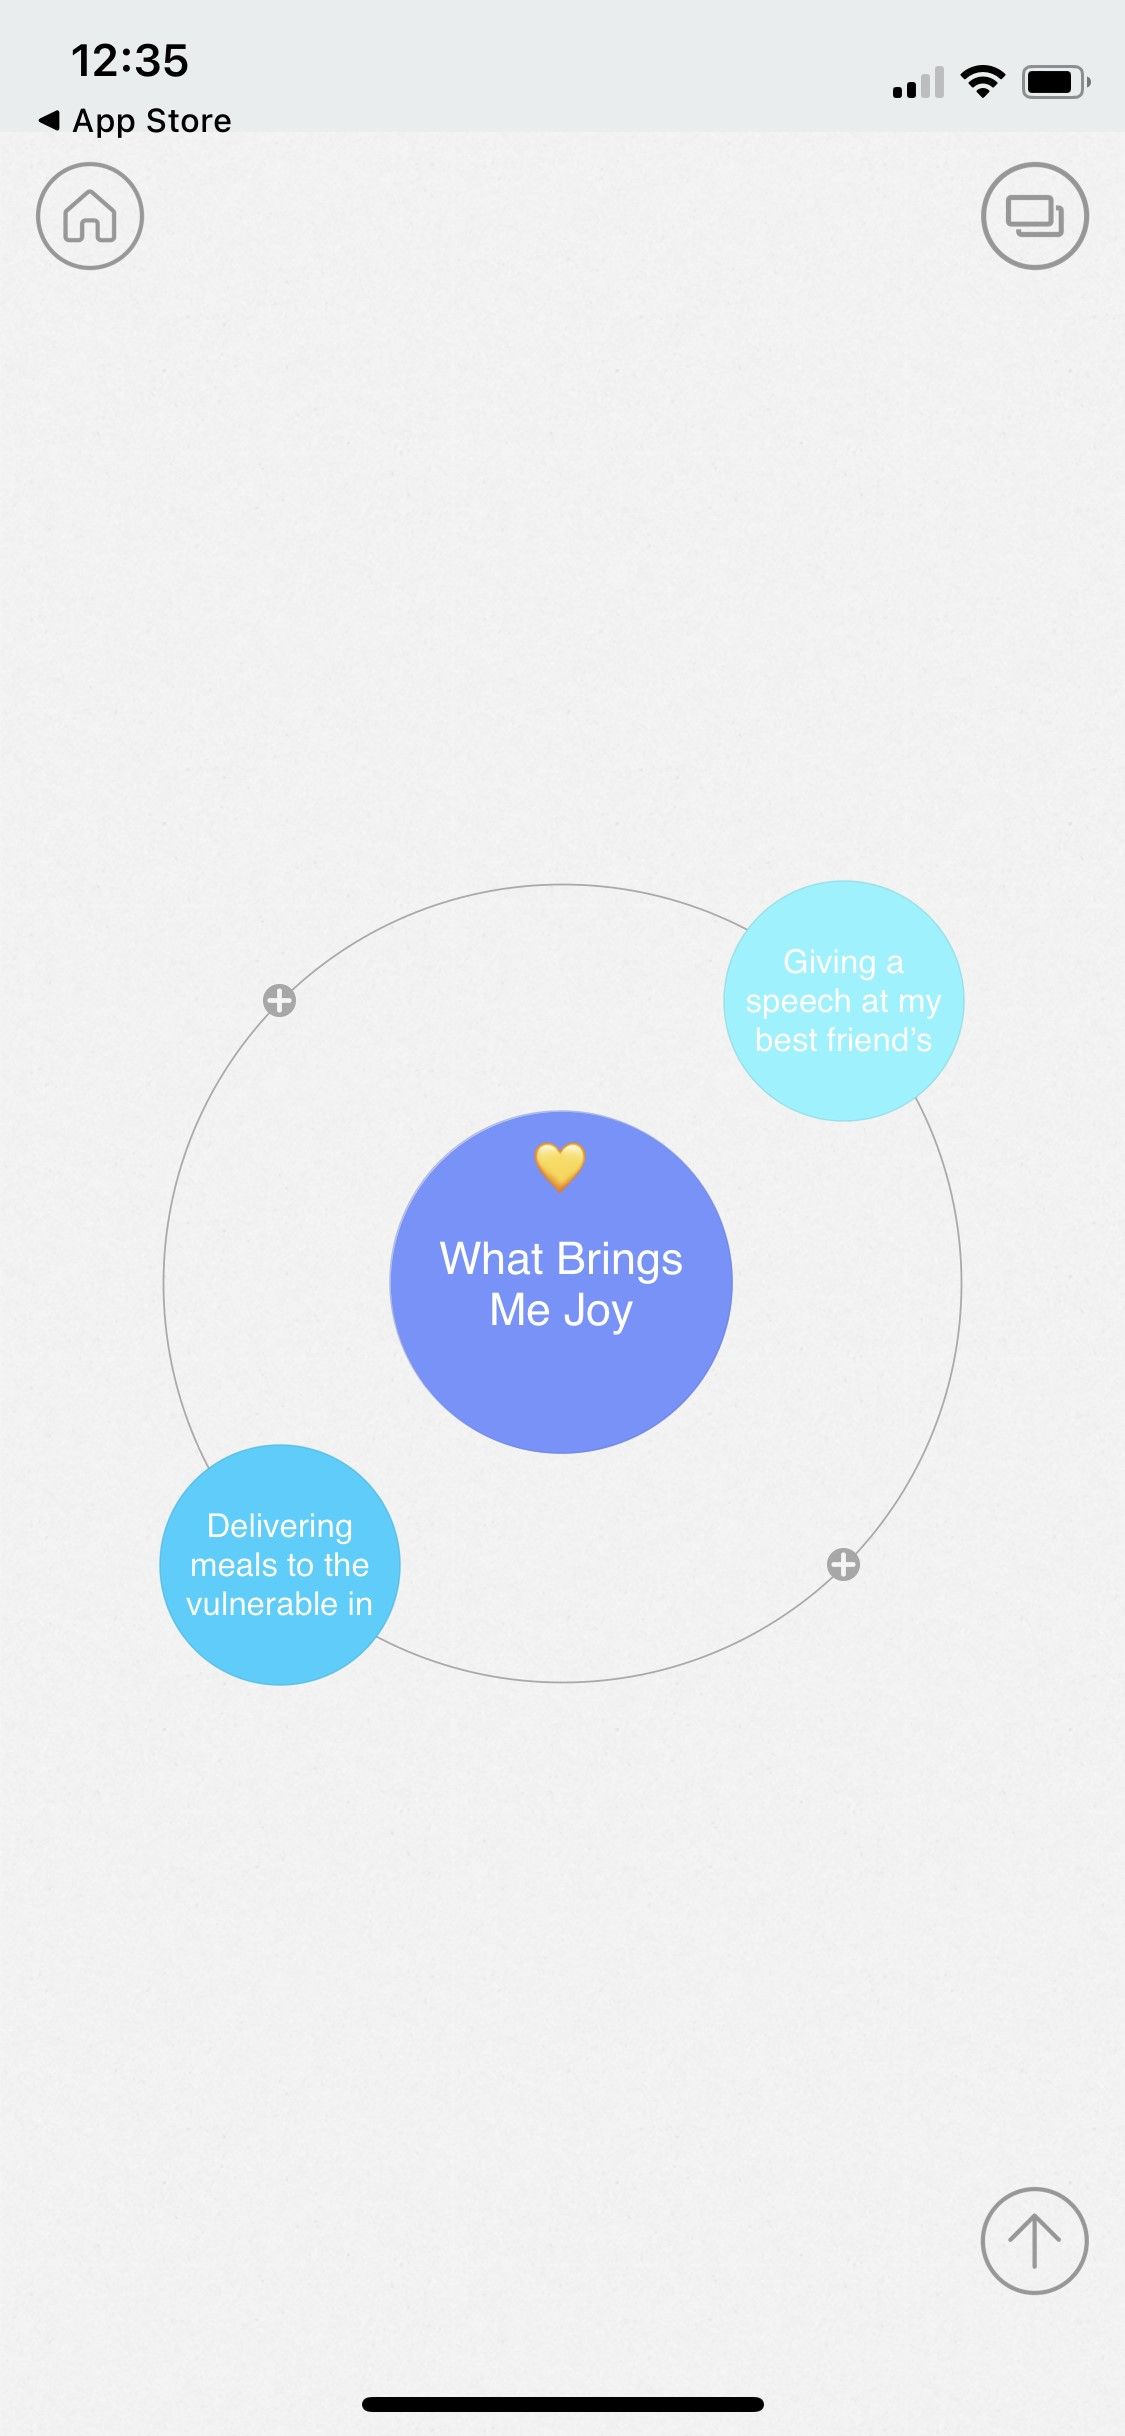 Use Mindly to Find Your Purpose and What Brings You Joy